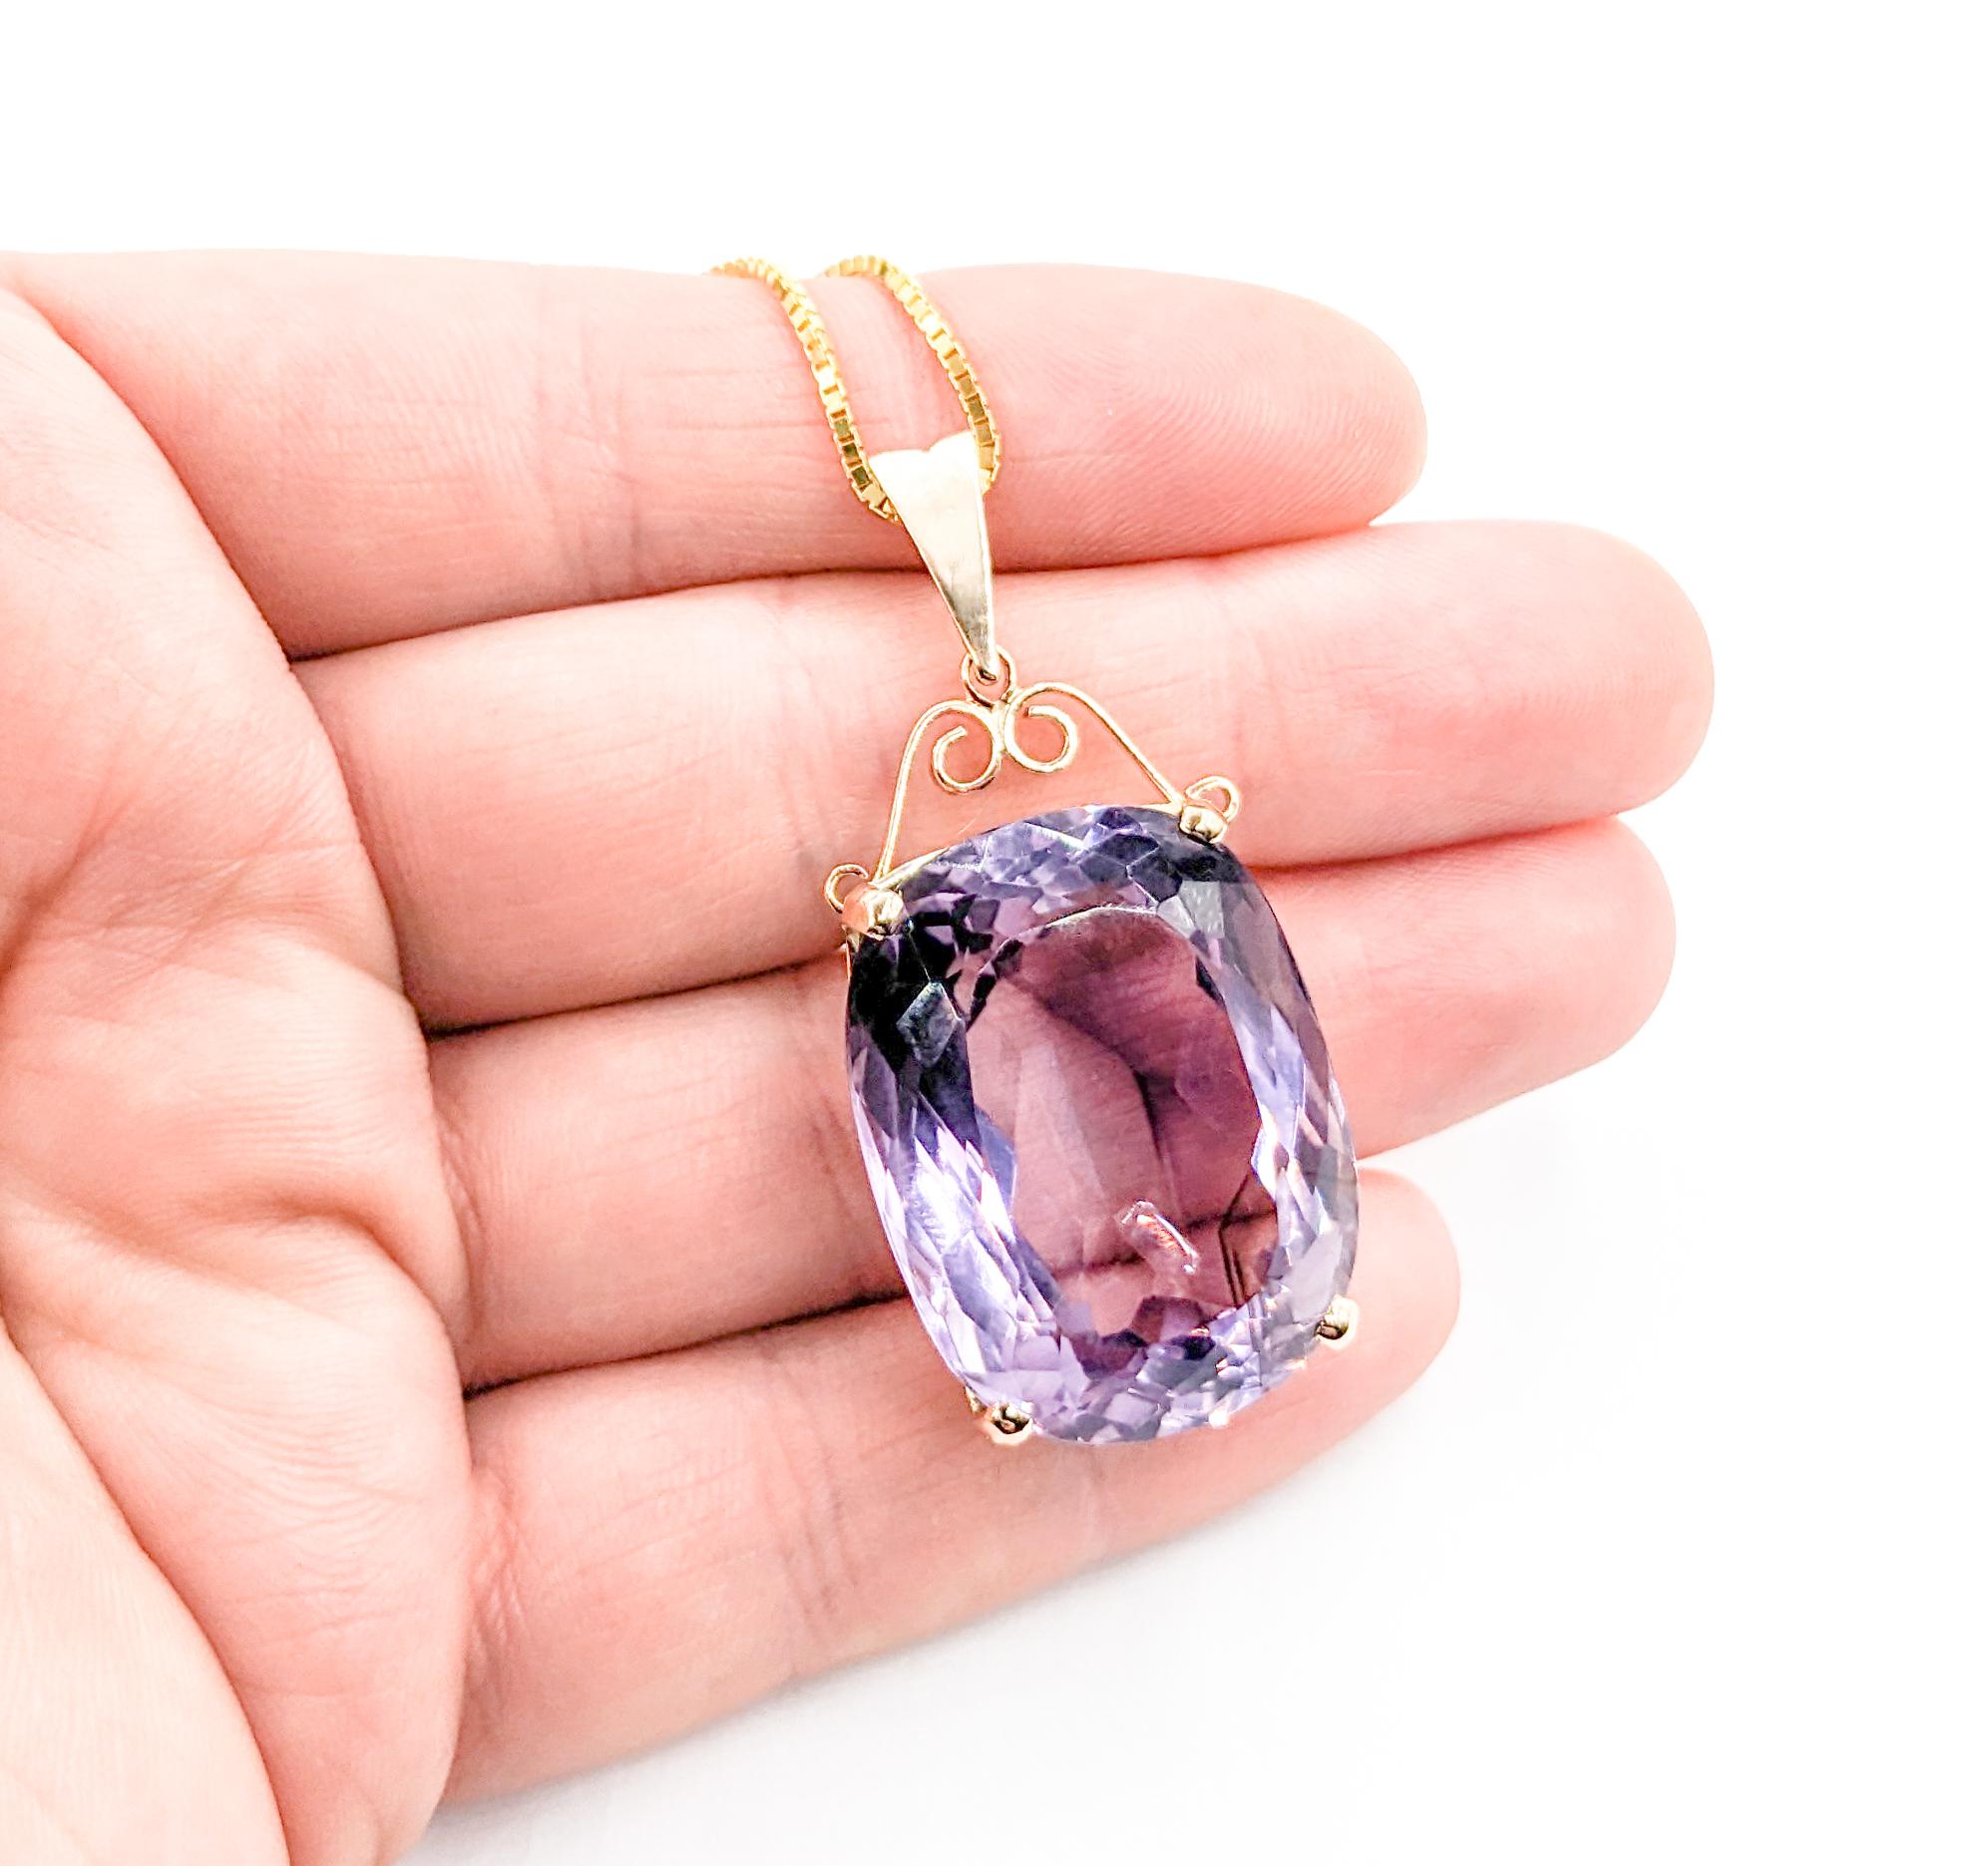 Round Cut 46ct Amethyst Pendant With Chain In Yellow Gold For Sale